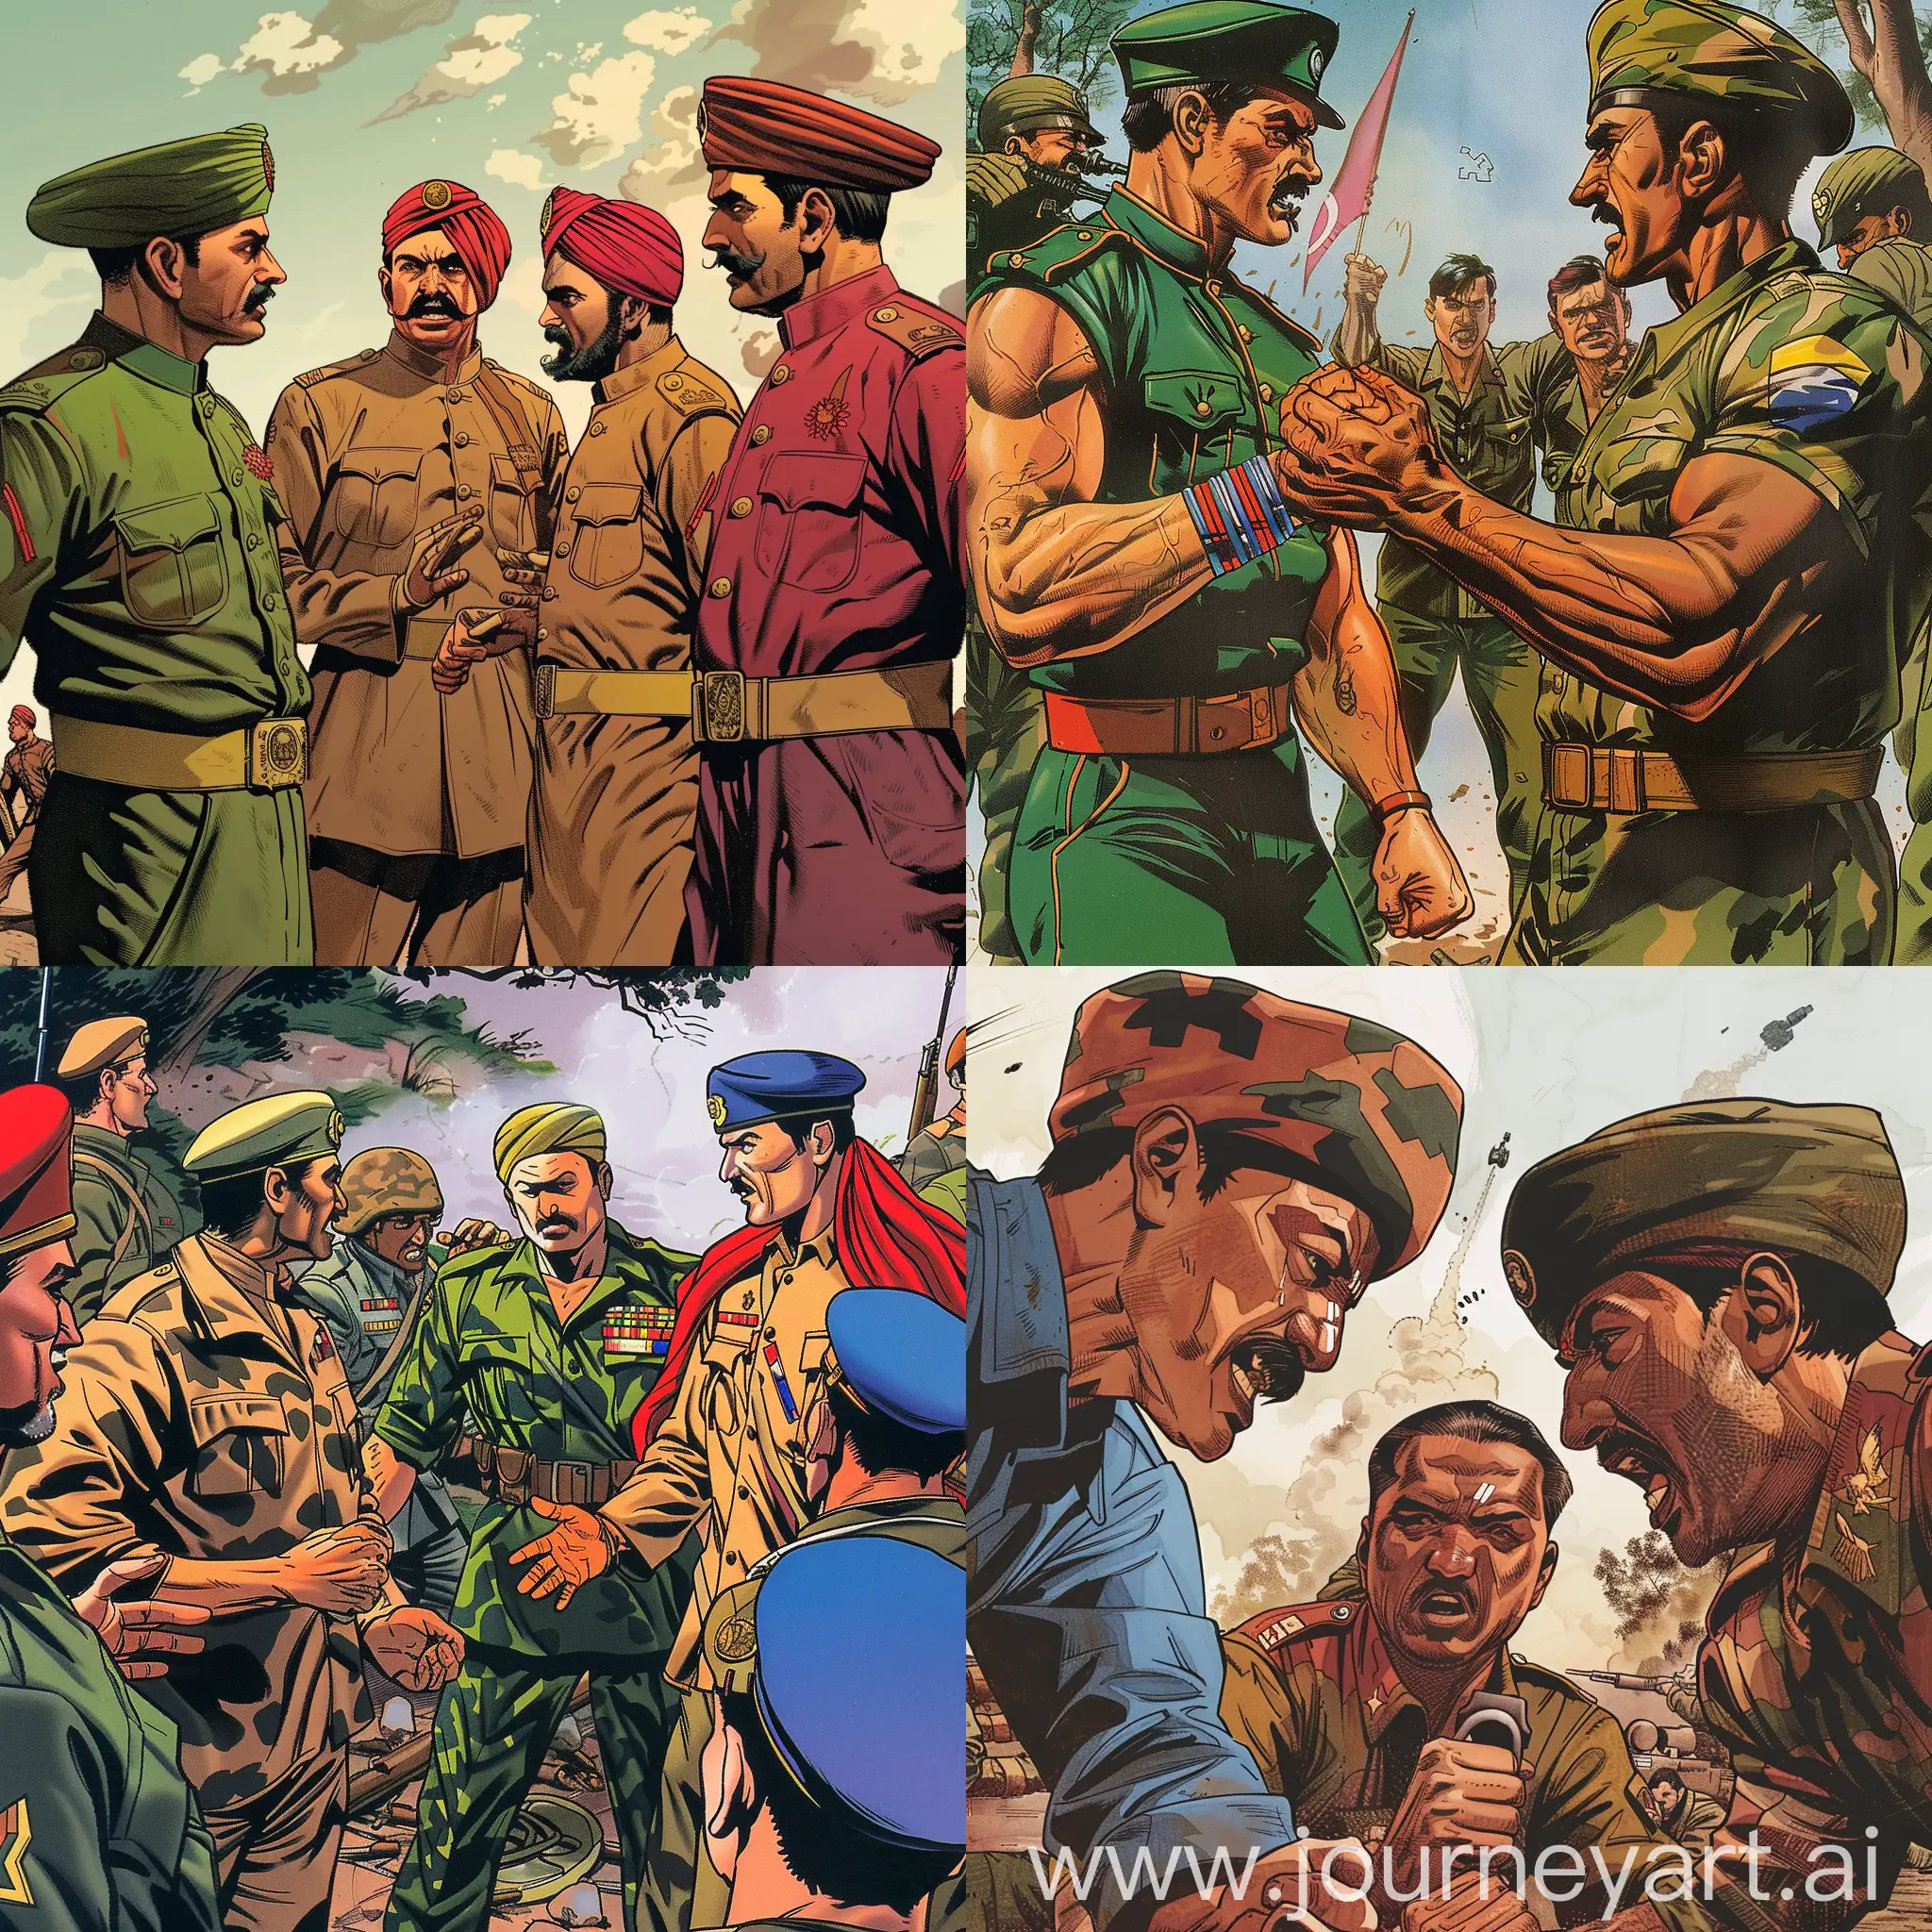 Indian-Army-Soldiers-in-Colorful-Military-Uniforms-Engaged-in-Argument